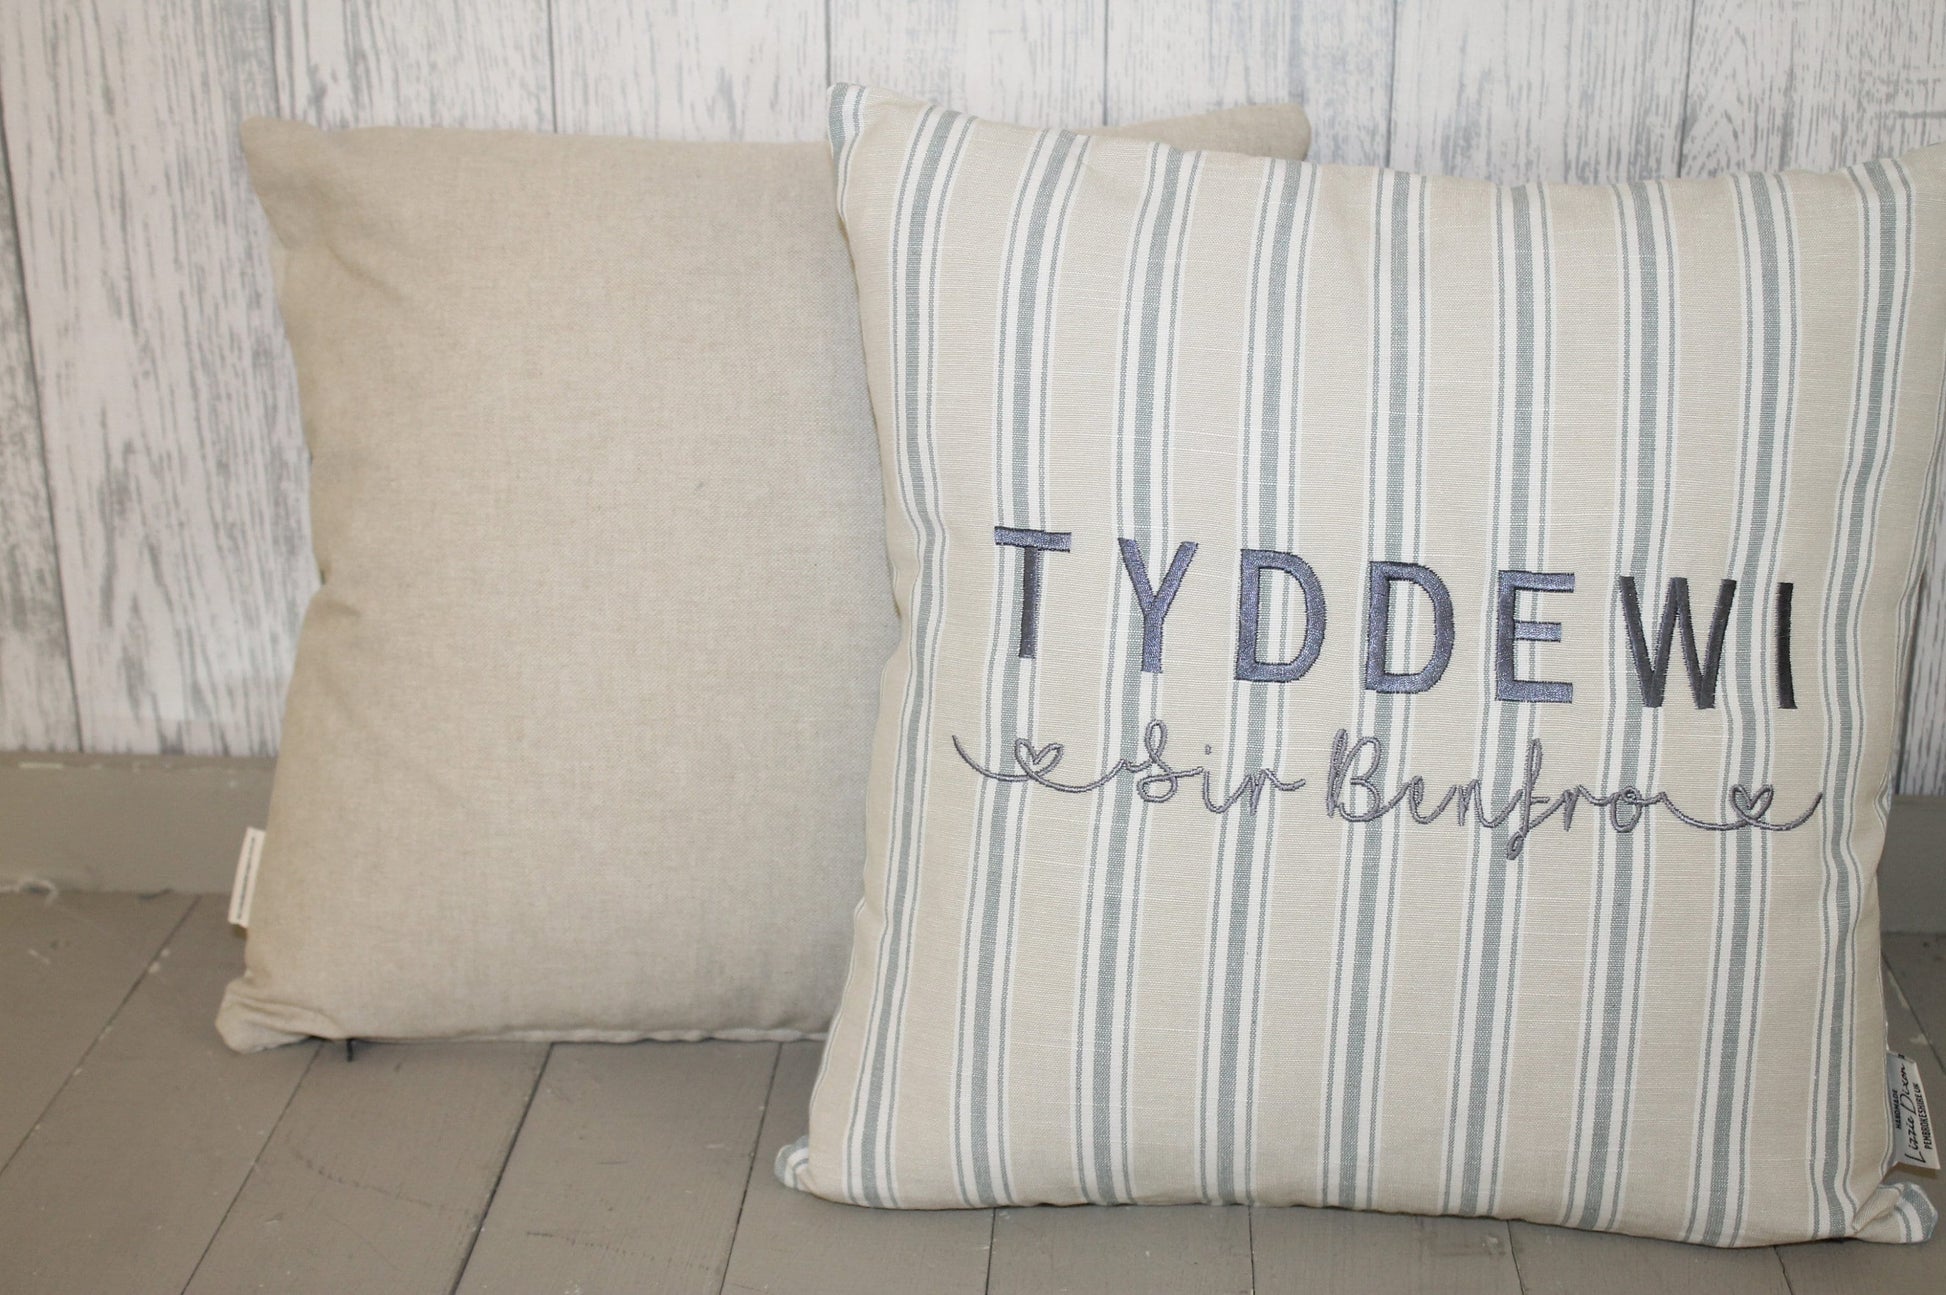 Location Cushions, Staycation Cushion,16" Nautical themed personalised beach holiday cushion- Blue and Taupe Ticking front ,Taupe back,